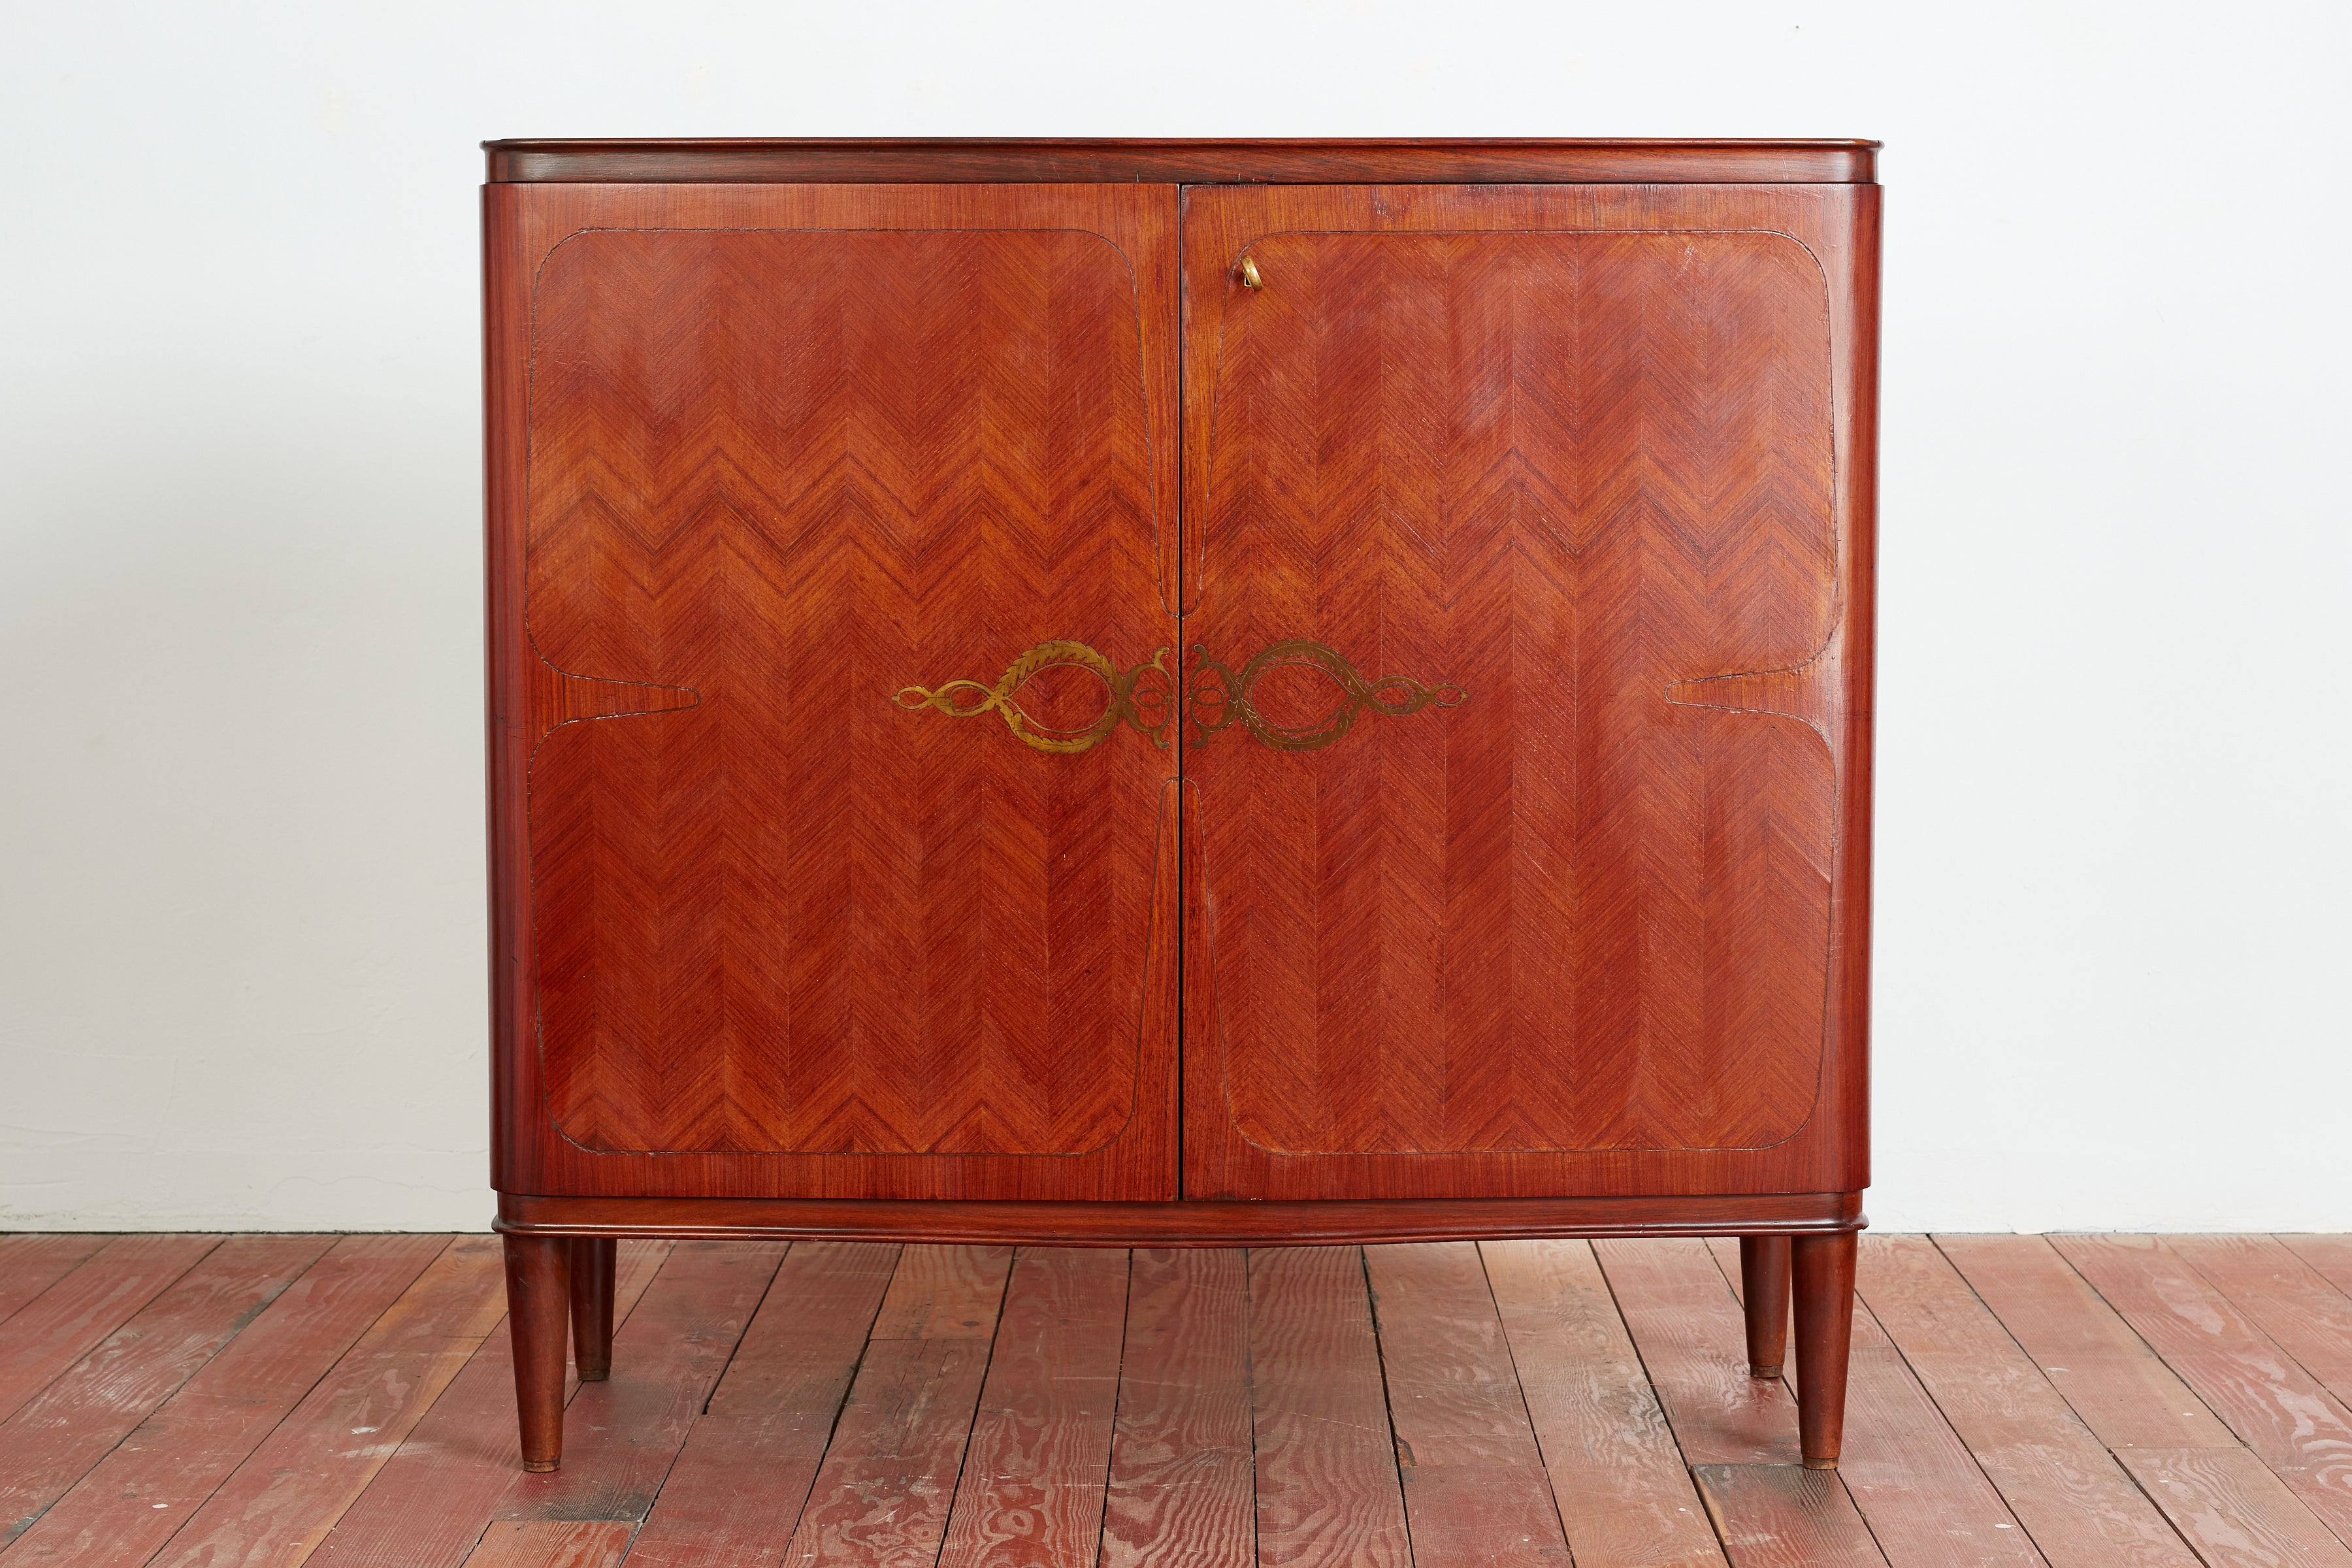 1940's Italian Mahogany wood bar cabinet with ornate herringbone patterned doors with inlay detail.  Doors open to reveal mirrored cased through out interior with brass and glass shelves for bottles and glasses.  Center shelf has multiple pull out